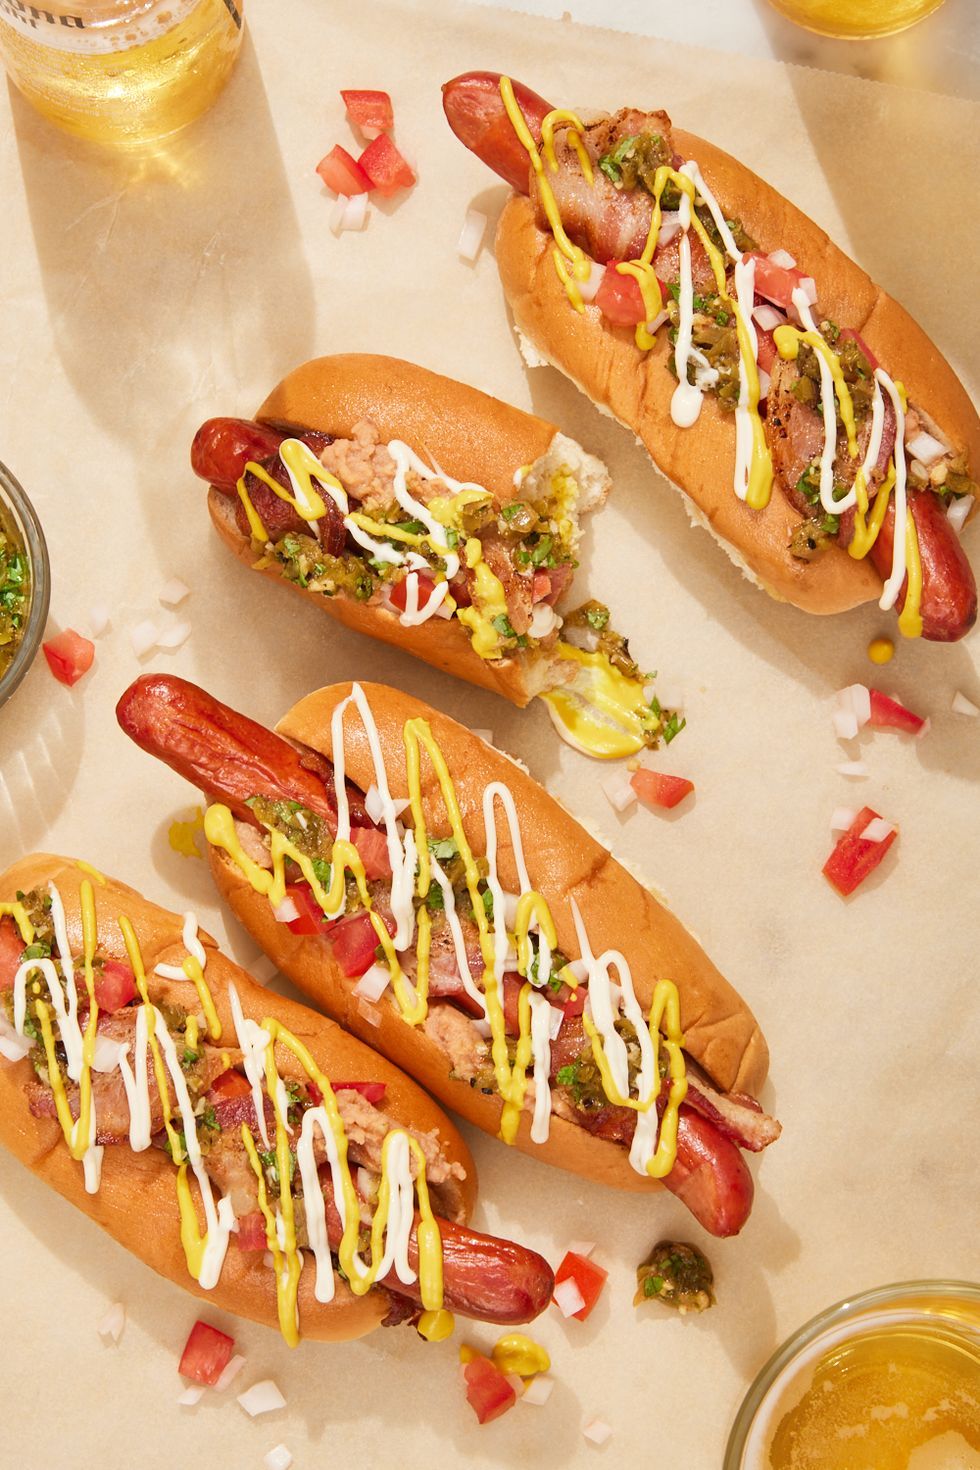 Best Hot Dog Toppings